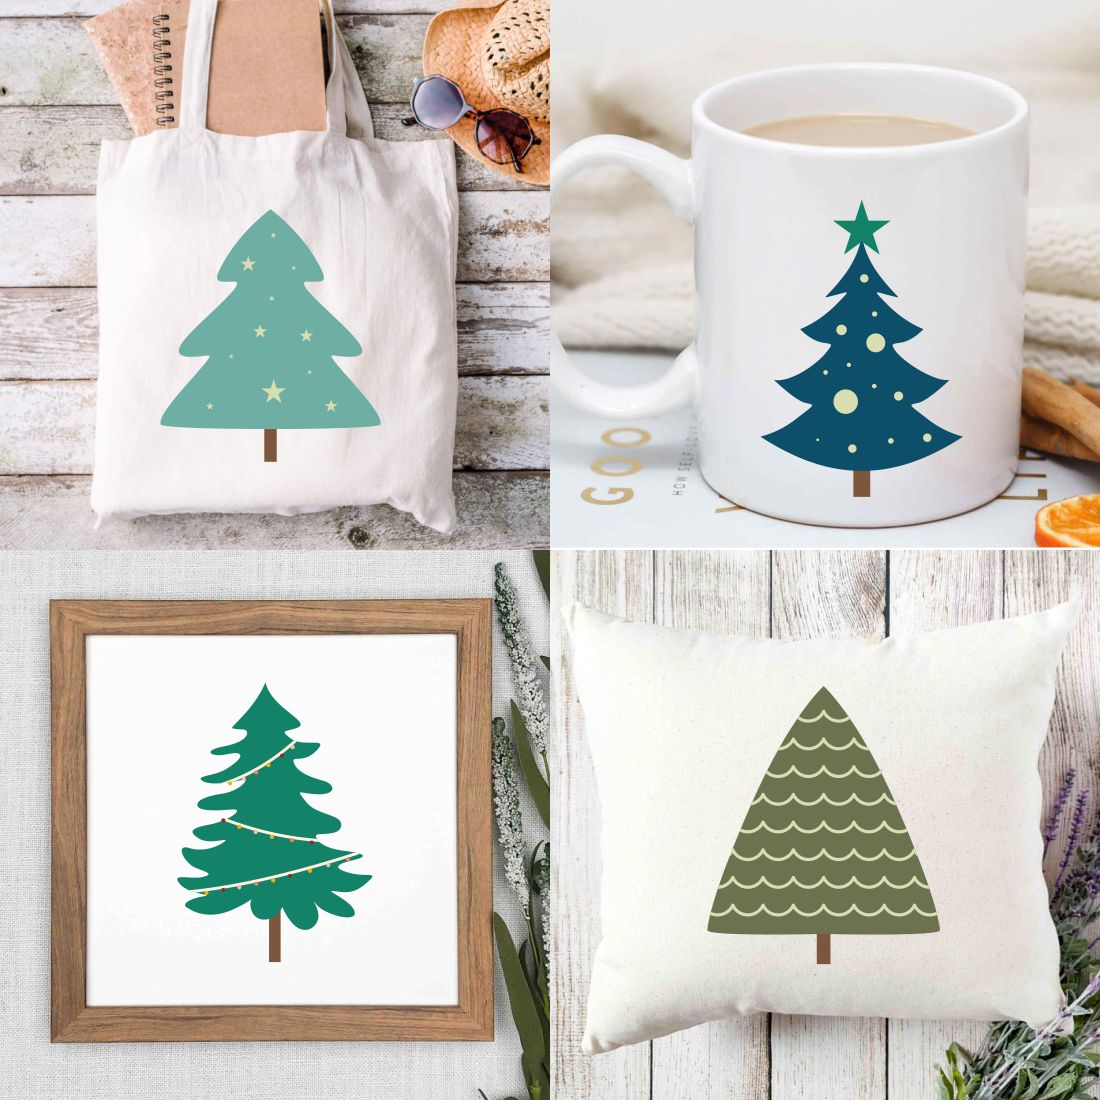 Set of images of objects with charming prints of Christmas trees.